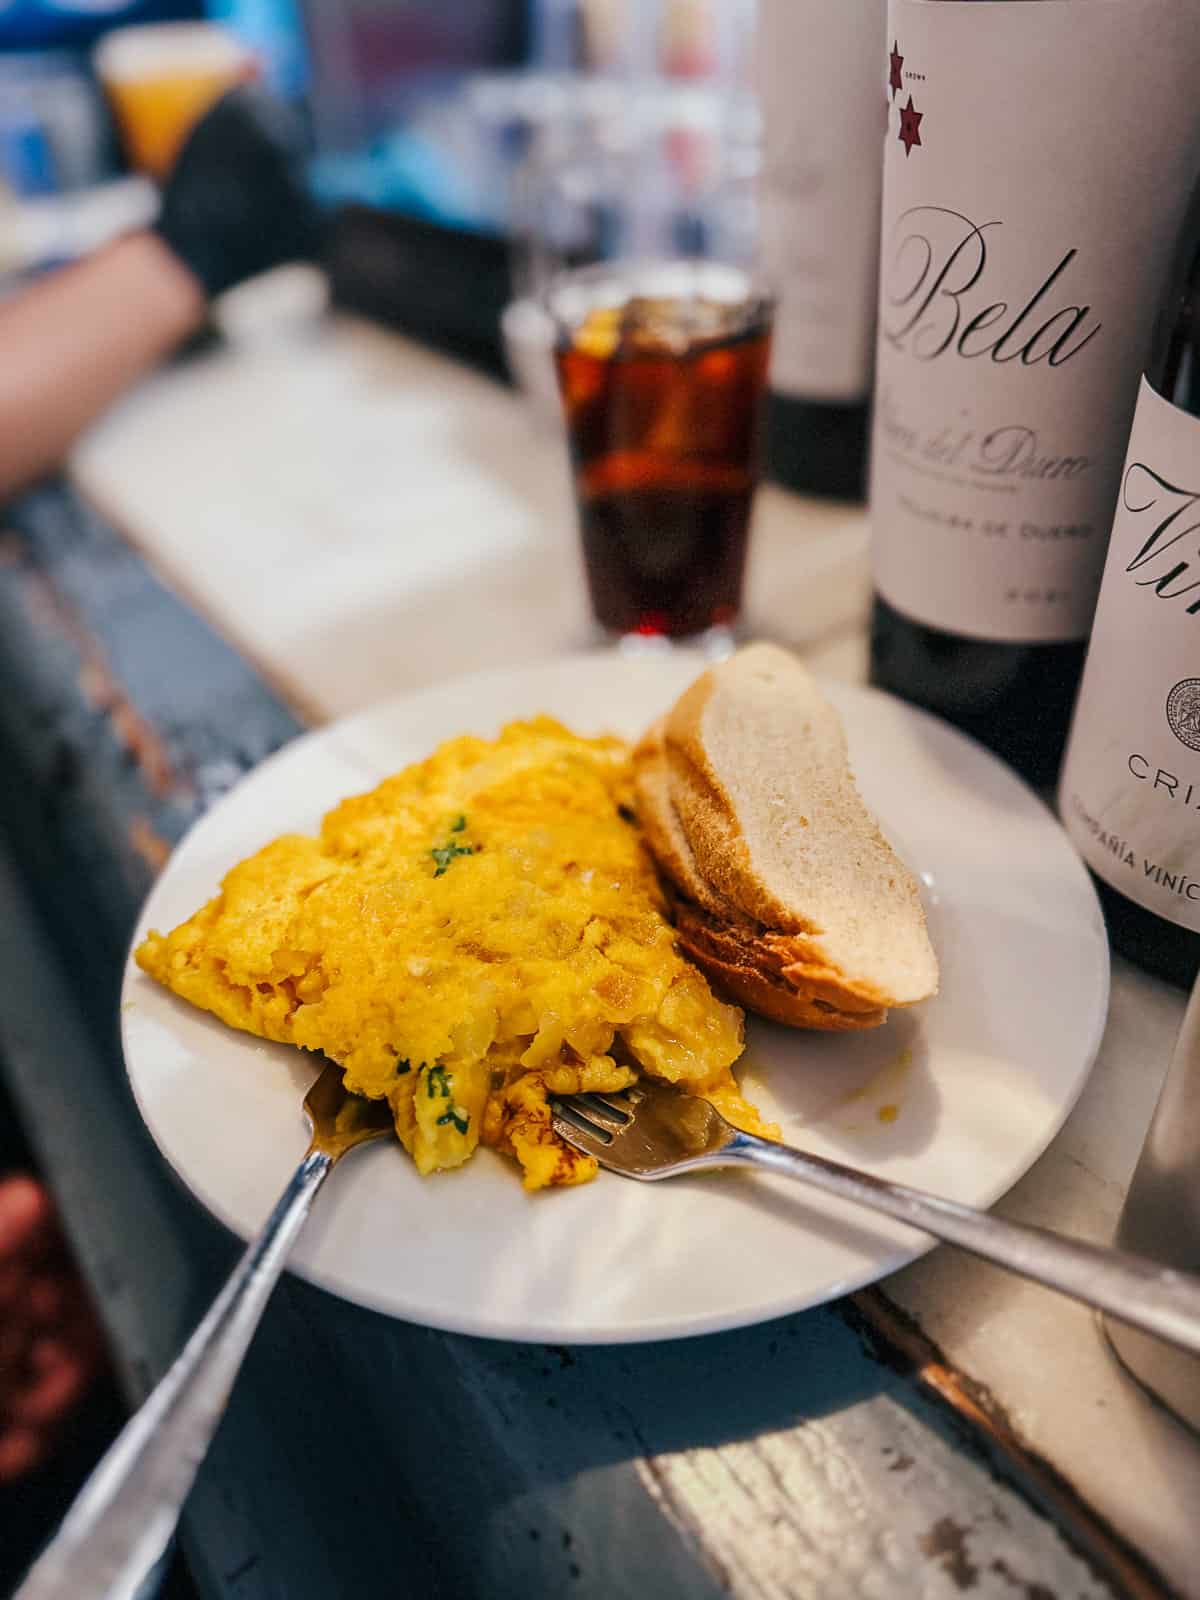 Traditional Spanish omelette served with bread on a white plate, accompanied by a glass of vermouth, set against a backdrop of a busy bar